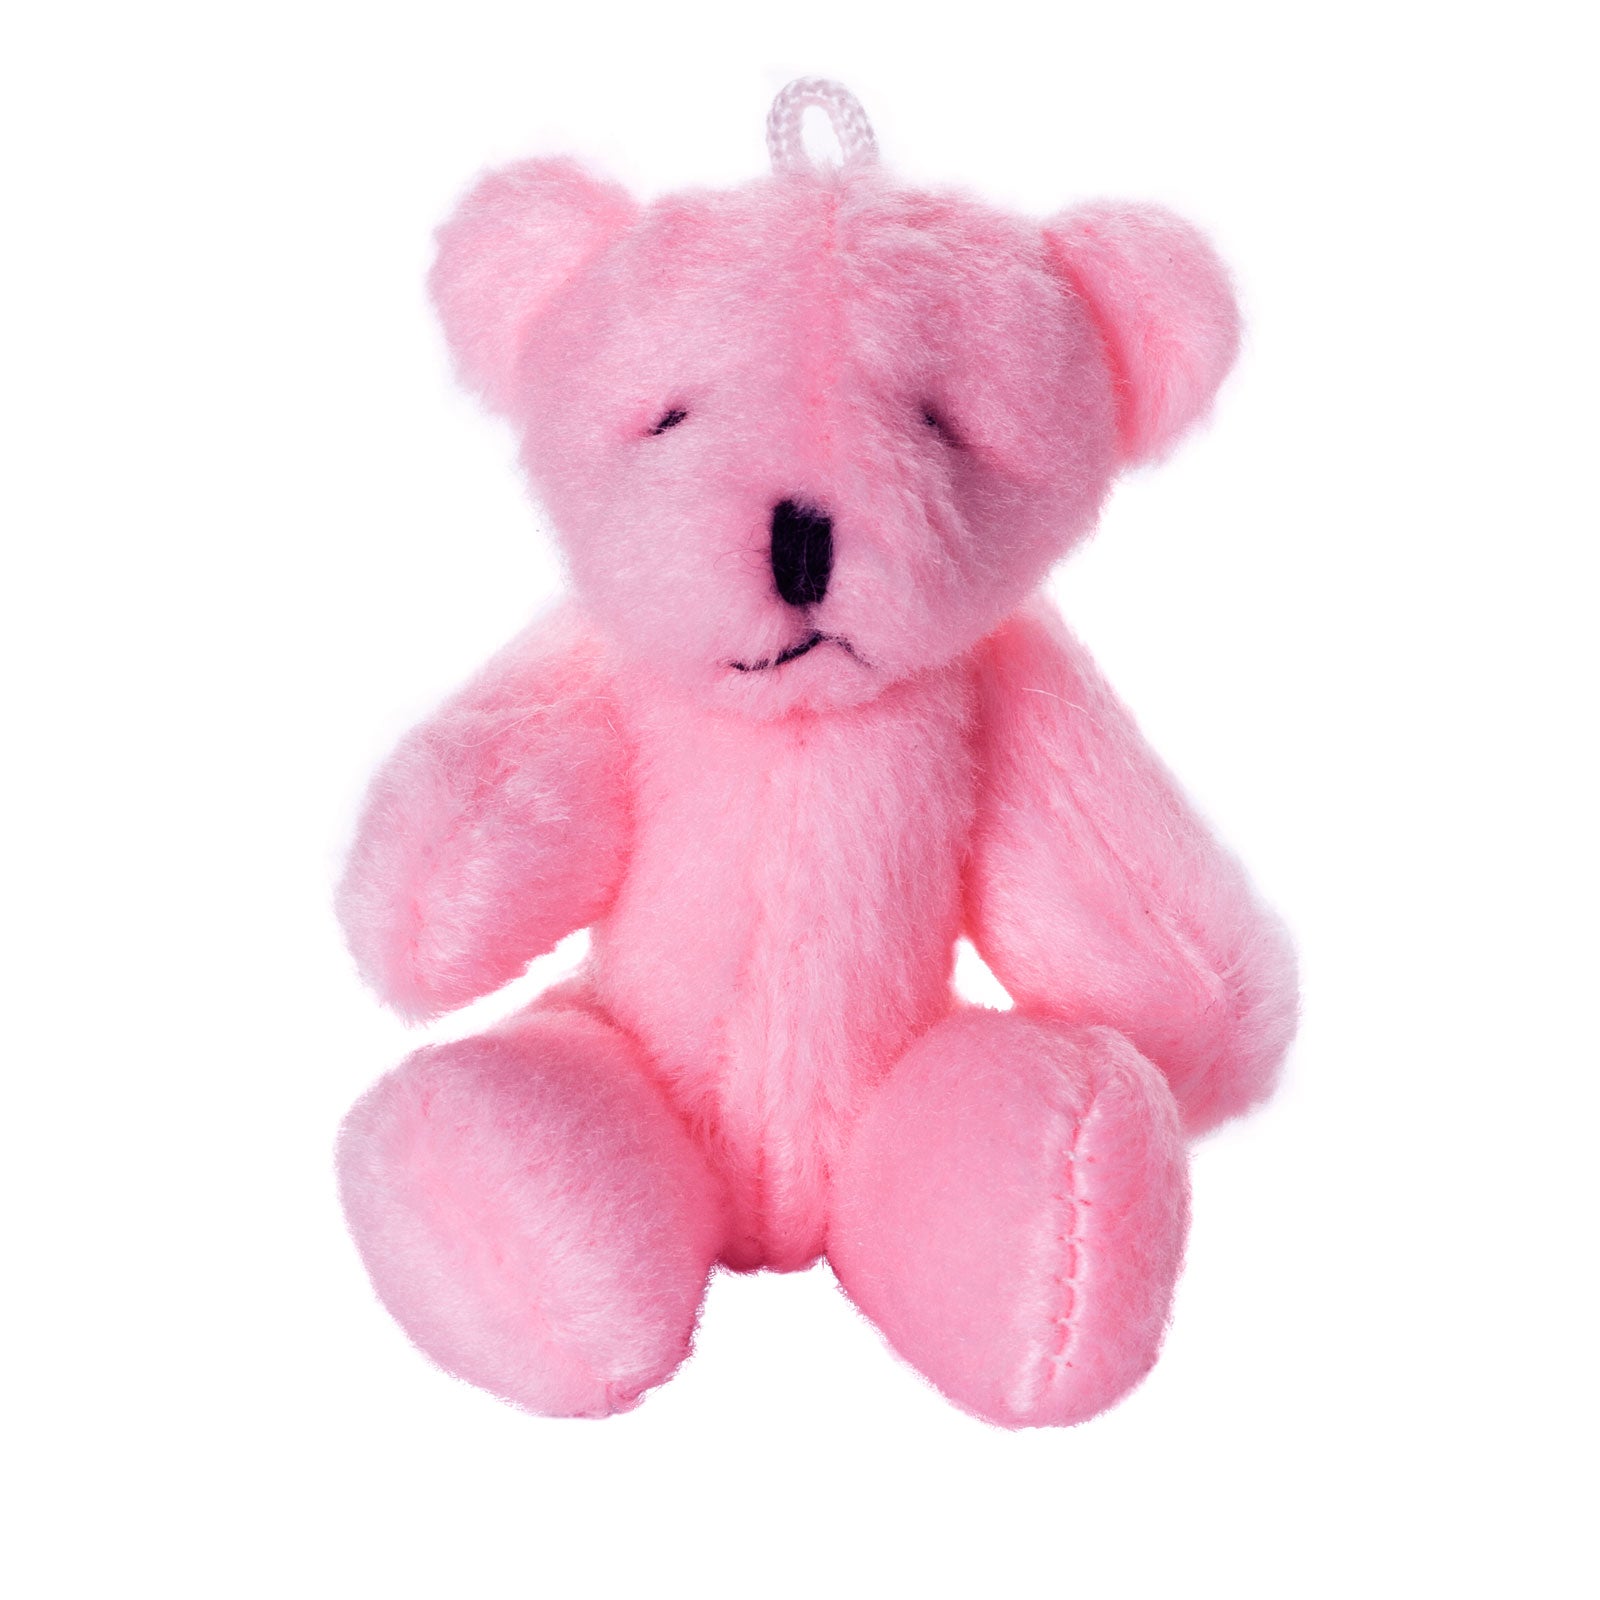 Small PINK Teddy Bears X 70 - Cute Soft Adorable